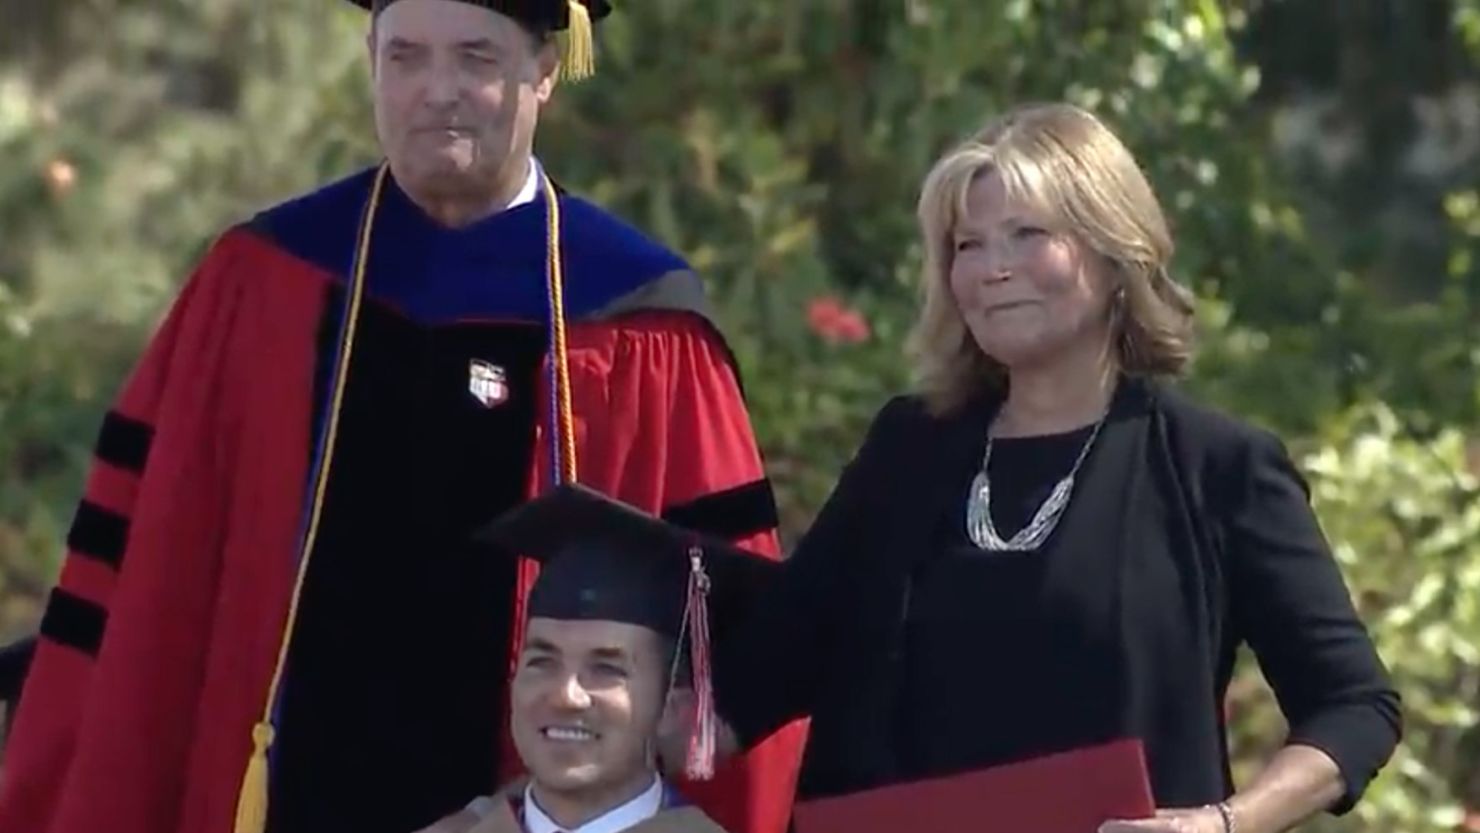 Judy O'Connor and her son Marty pose on graduation day.